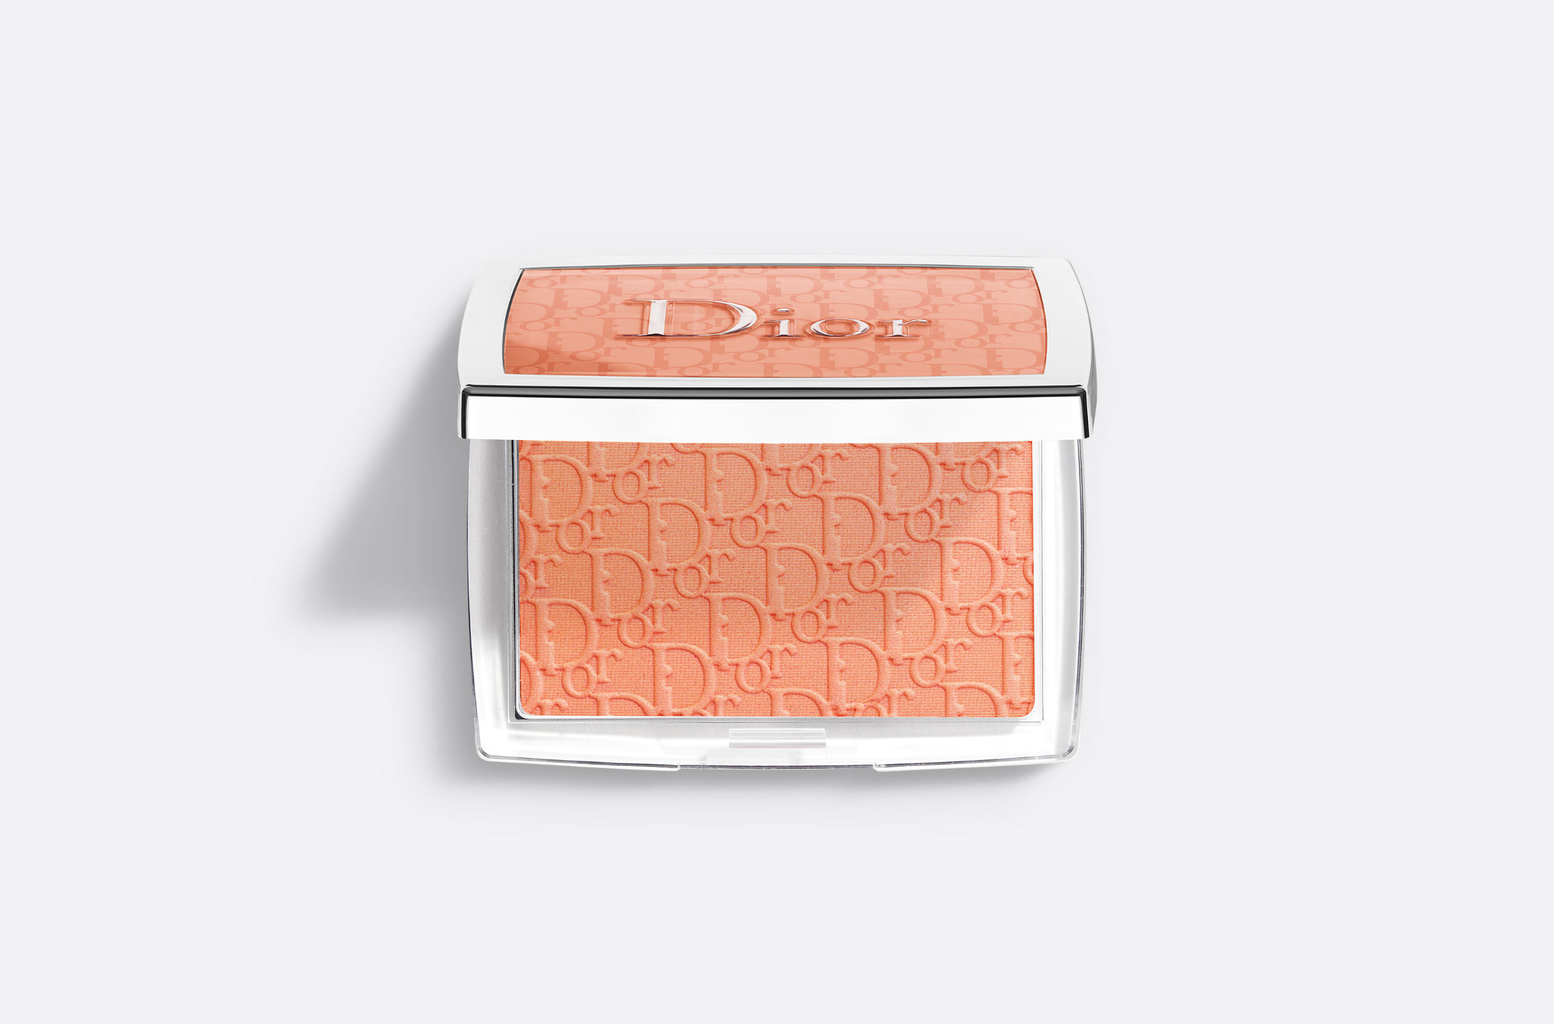 Dior Blush Product from Website